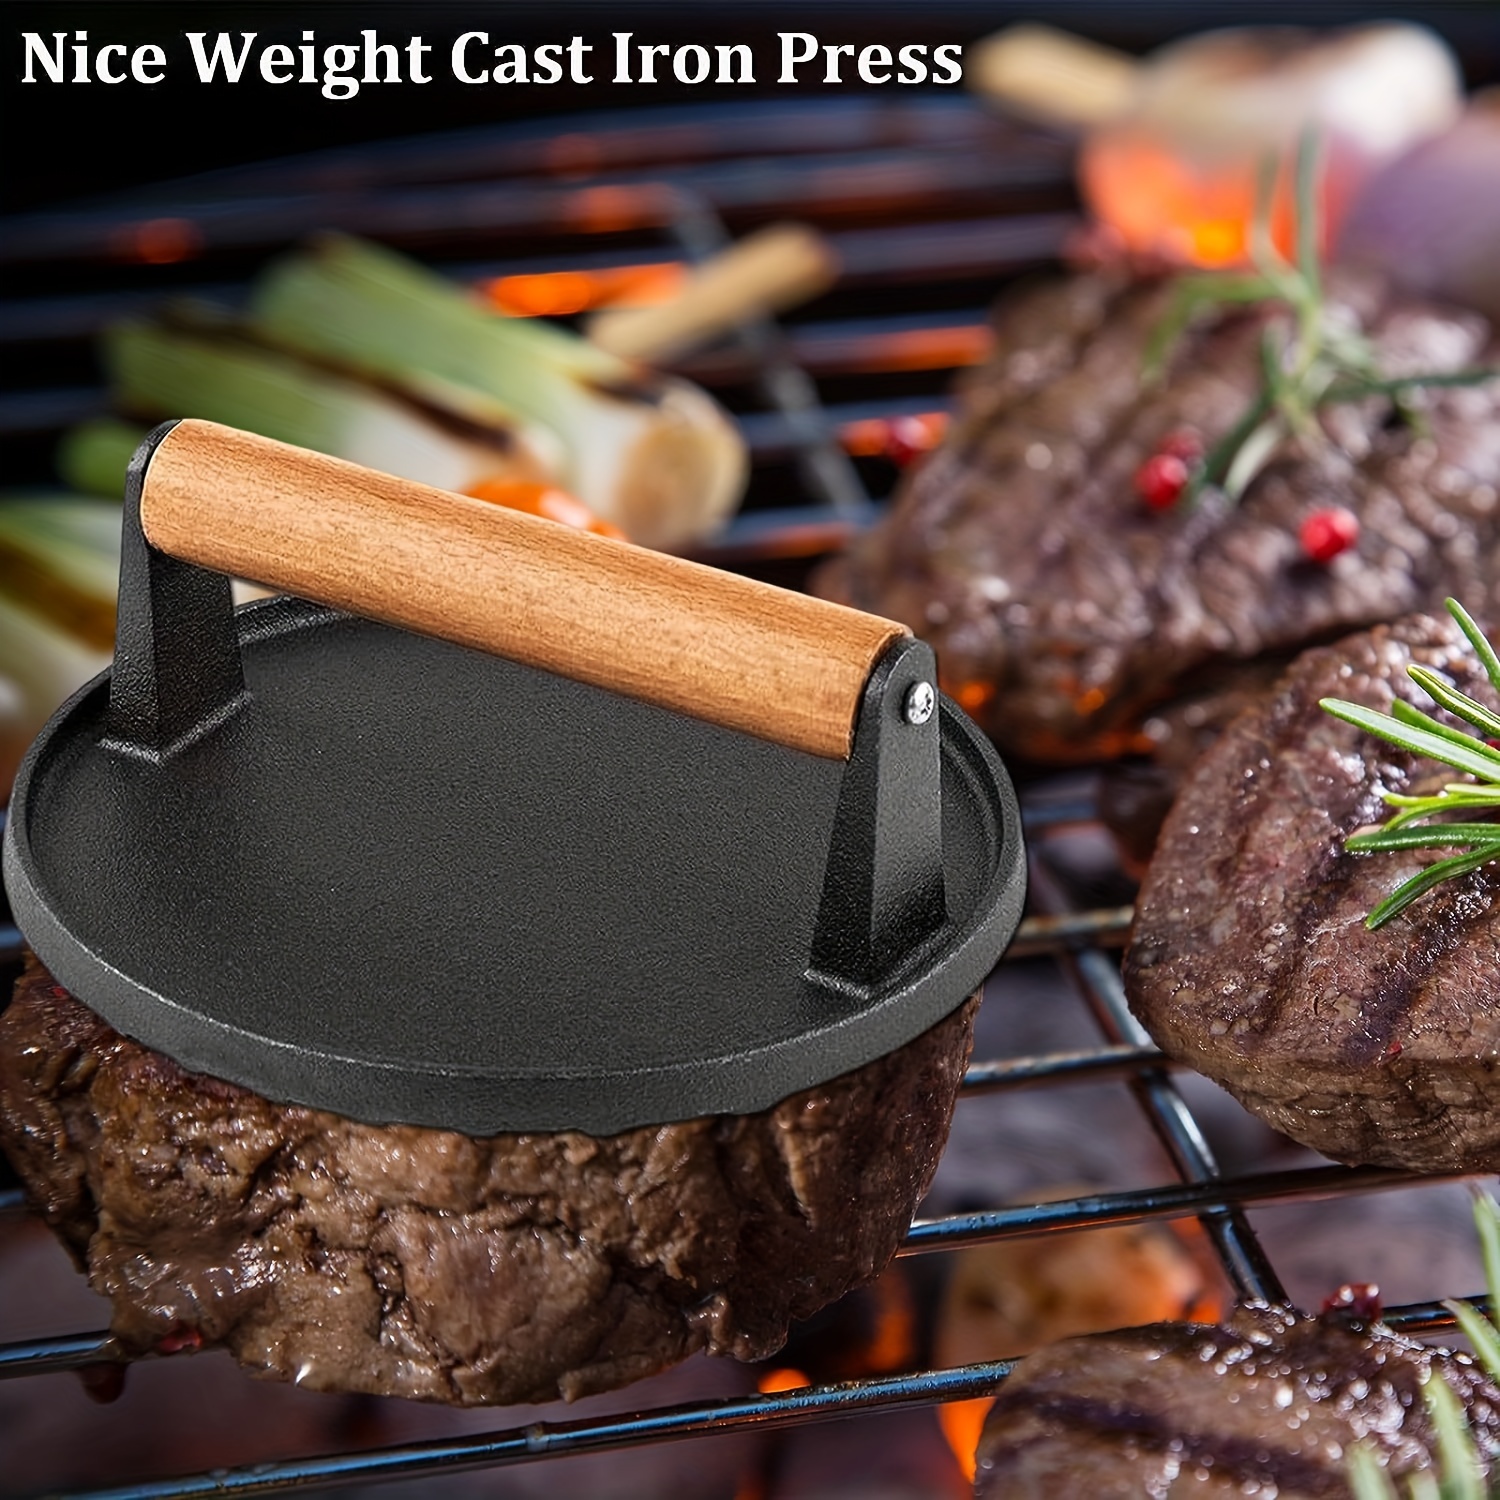 This Cast Iron Tool Is the Secret to Perfect Smash Burgers, and